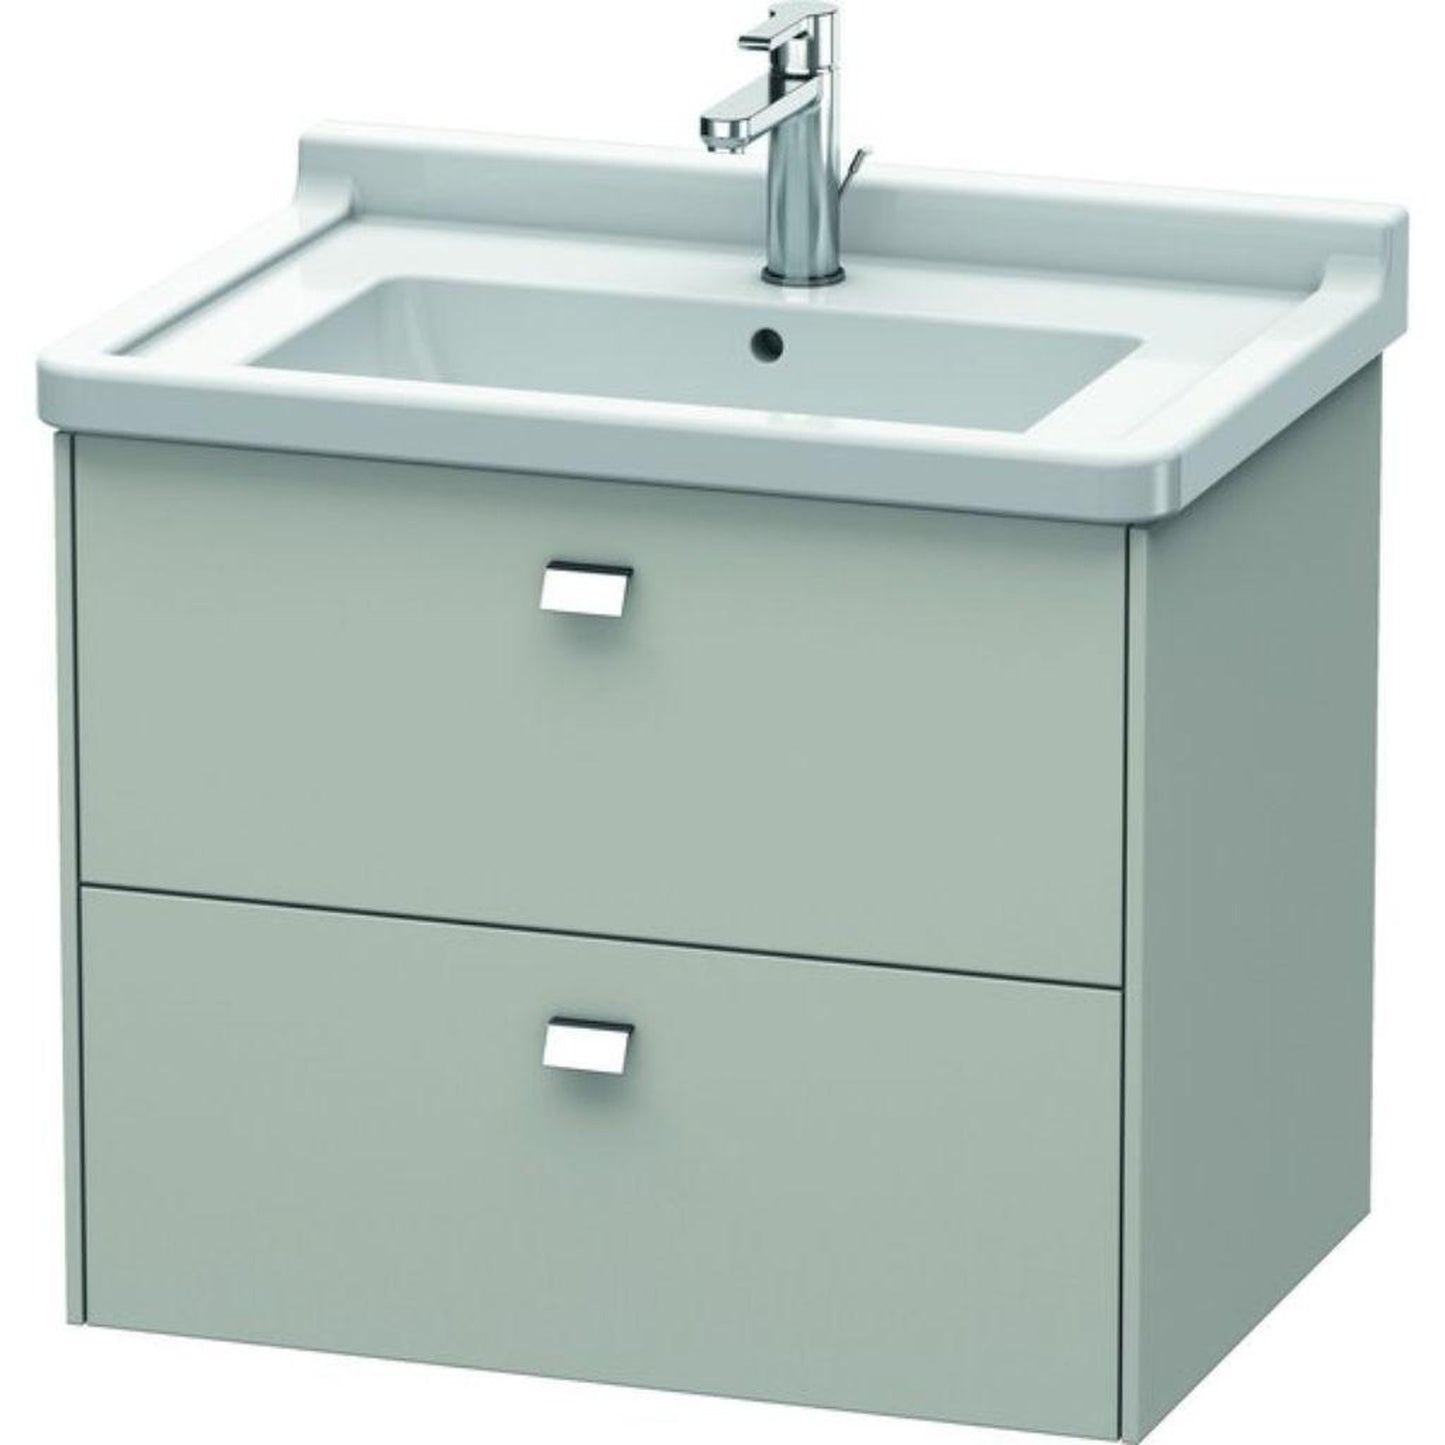 Duravit Brioso BR41410 26" x 22" x 18" Two Drawer Wall-Mount Vanity Unit in Concrete Grey Matt and Chrome Handle